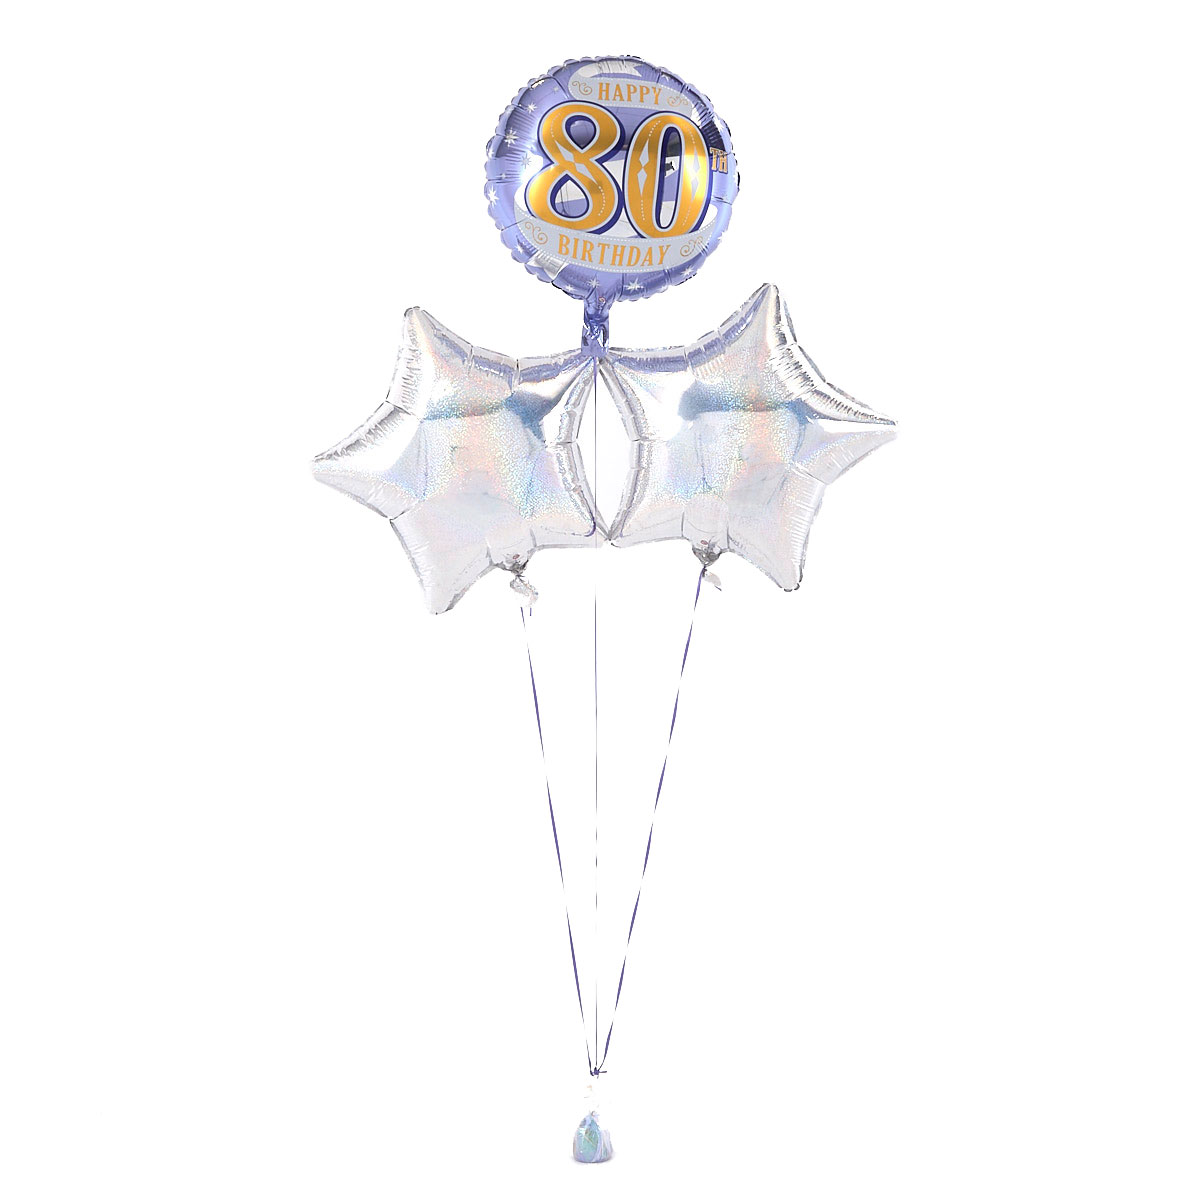 80th Birthday Silver Balloon Bouquet - DELIVERED INFLATED!